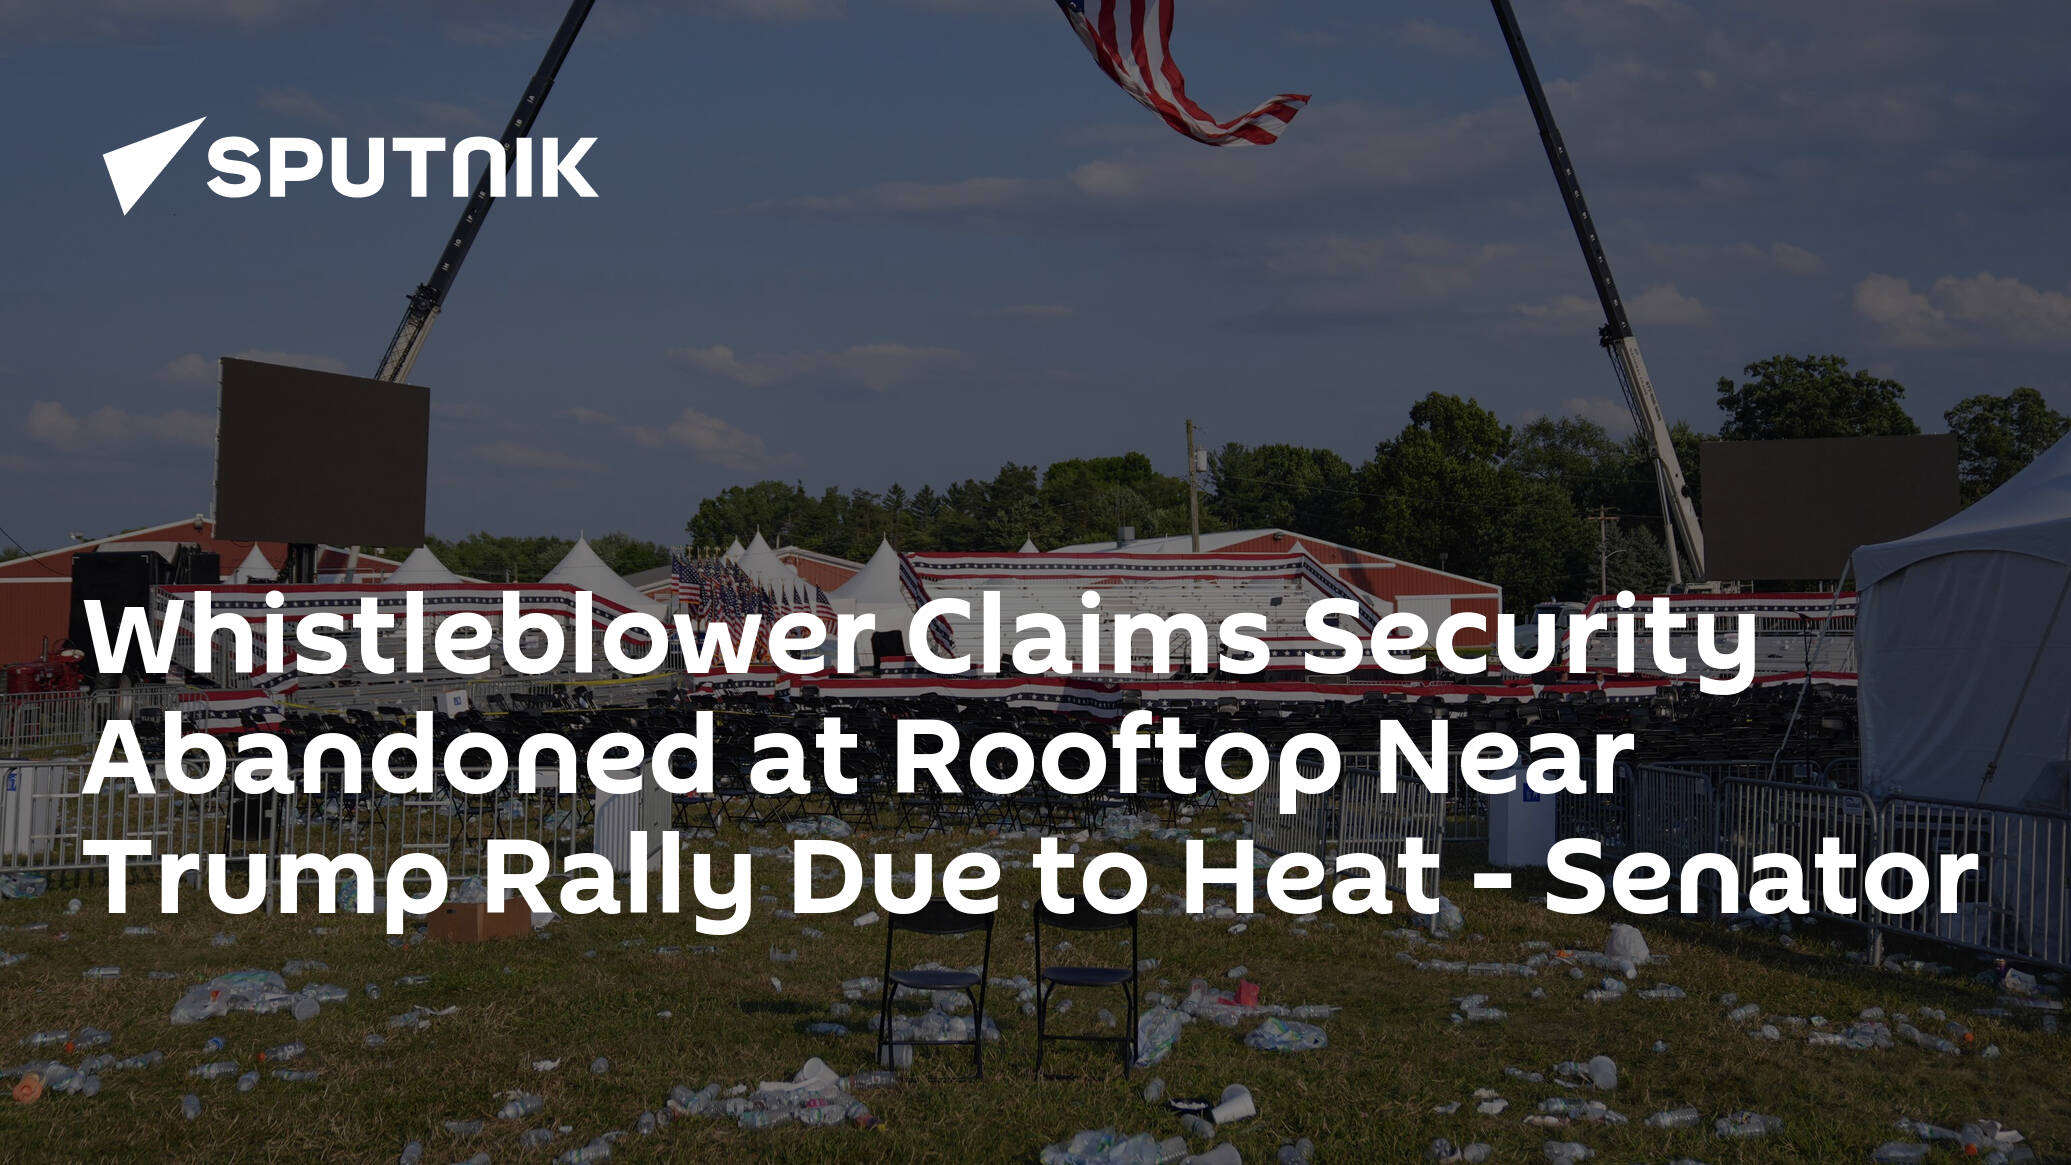 Whistleblower Claims Security Abandoned Rooftop Near Trump Rally Due to Heat - Senator